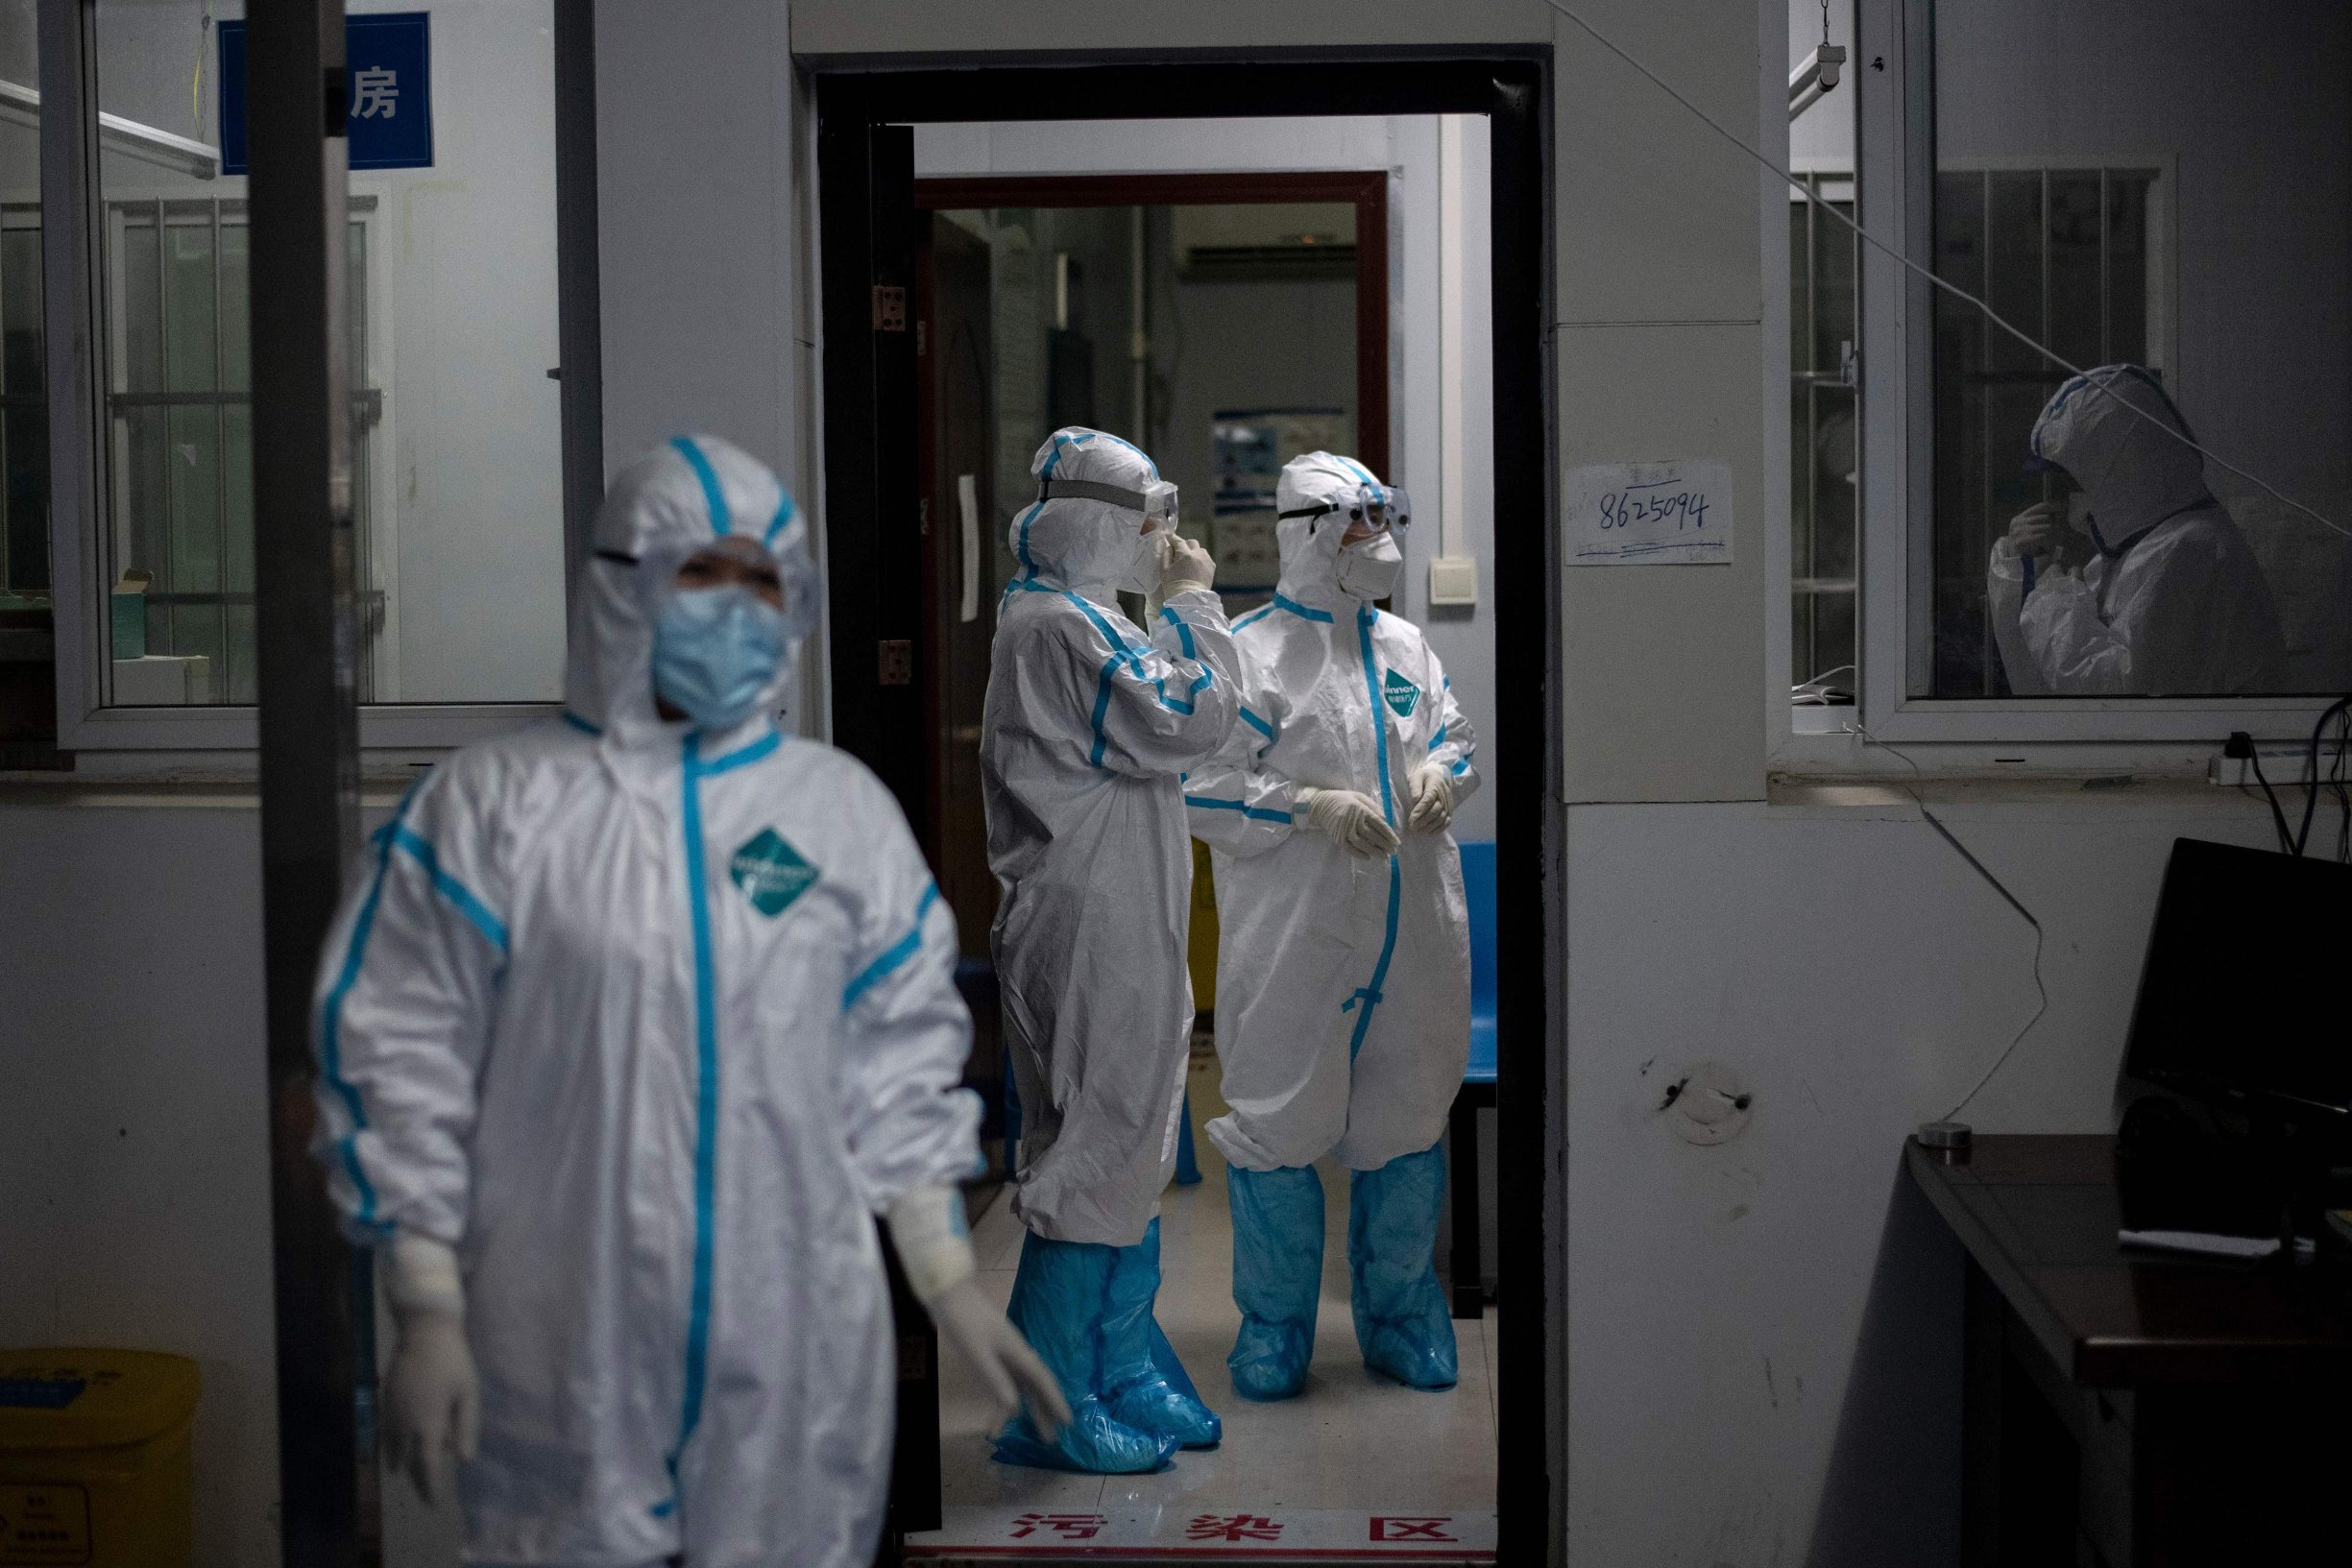 Medical workers wearing hazmat suits as a preventive measure against the COVID-19 coronavirus are seen at a fever clinic in Huanggang Zhongxin Hospital in Huanggang, in Chinas central Hubei province on March 26, 2020. (Photo by NOEL CELIS / AFP)